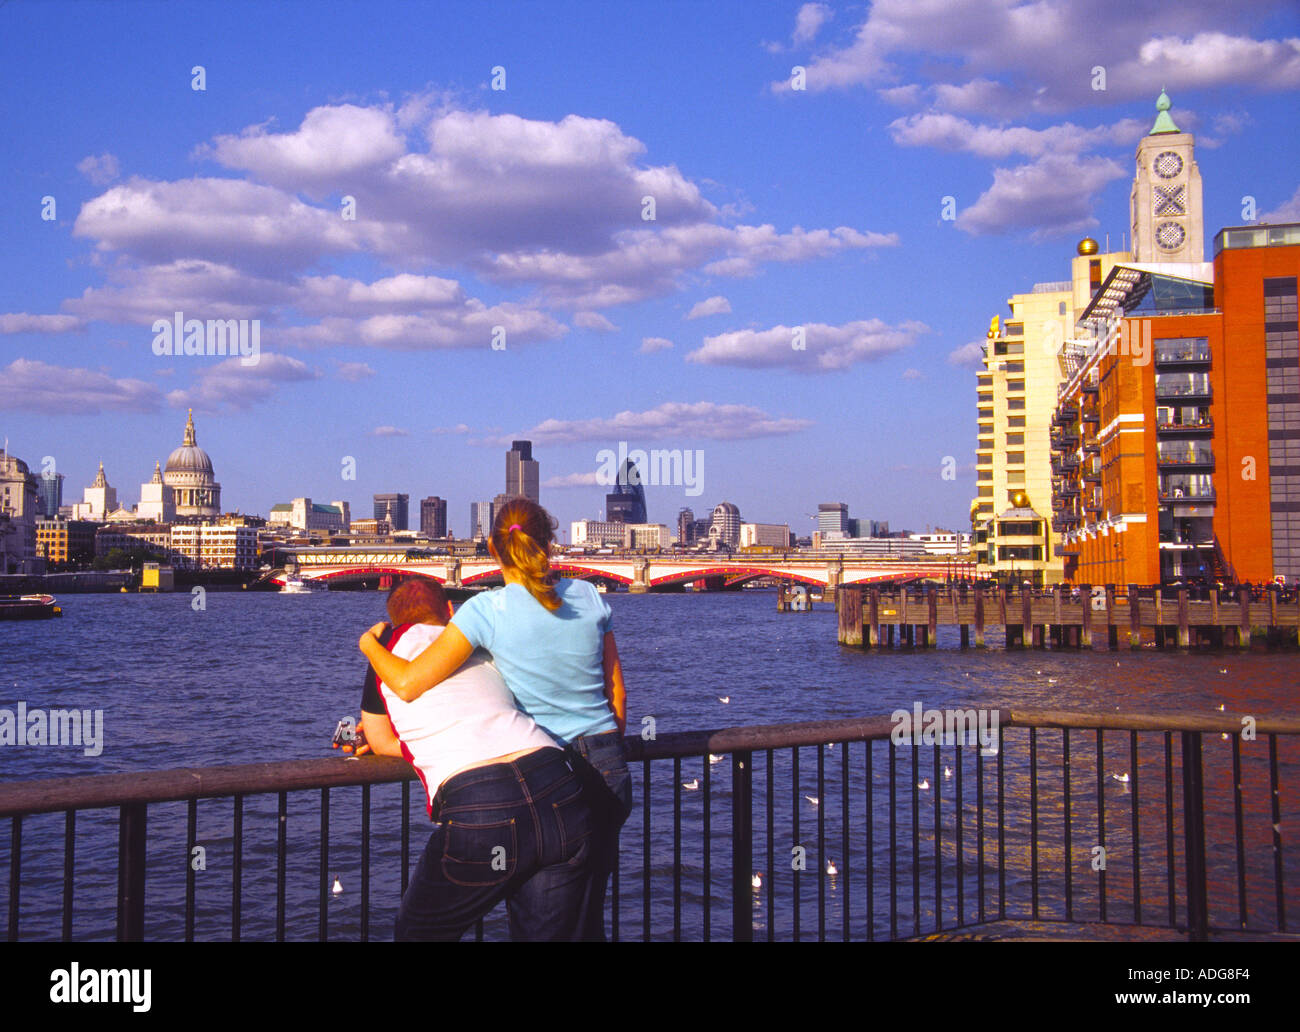 Couple Enjoy view of River Thames City of London Stock Photo